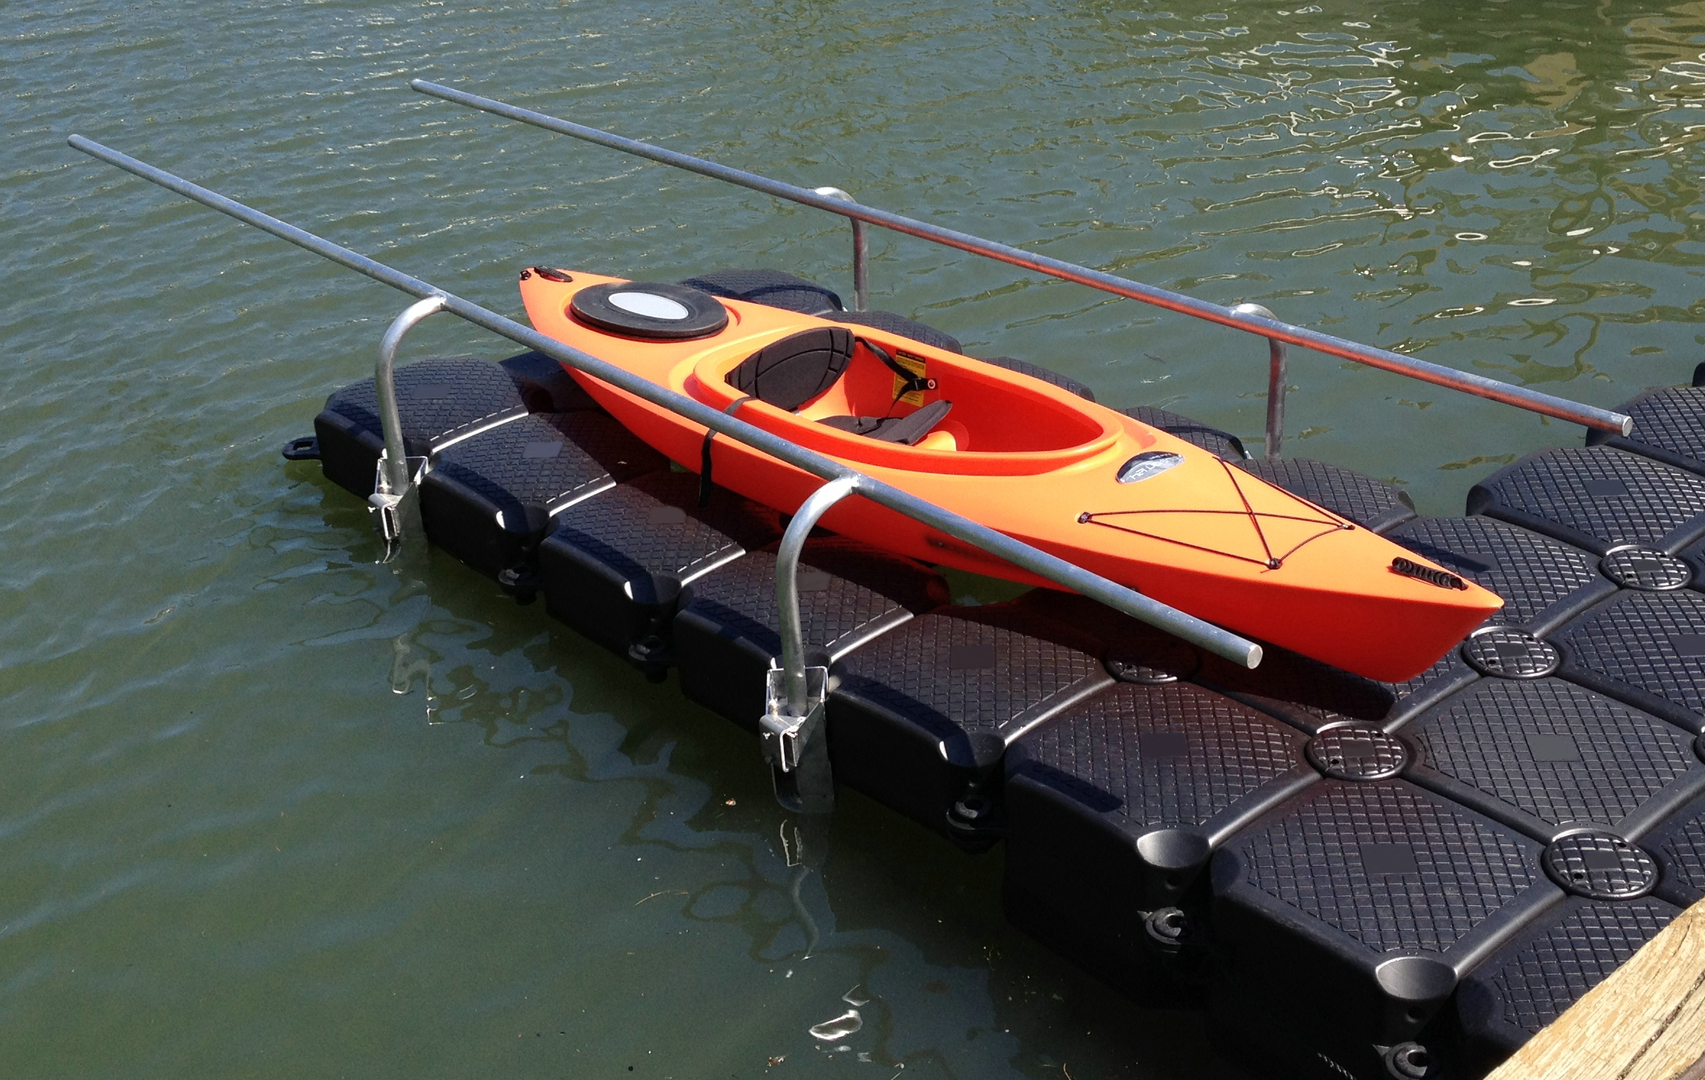 What are some highly rated kayak launching systems?